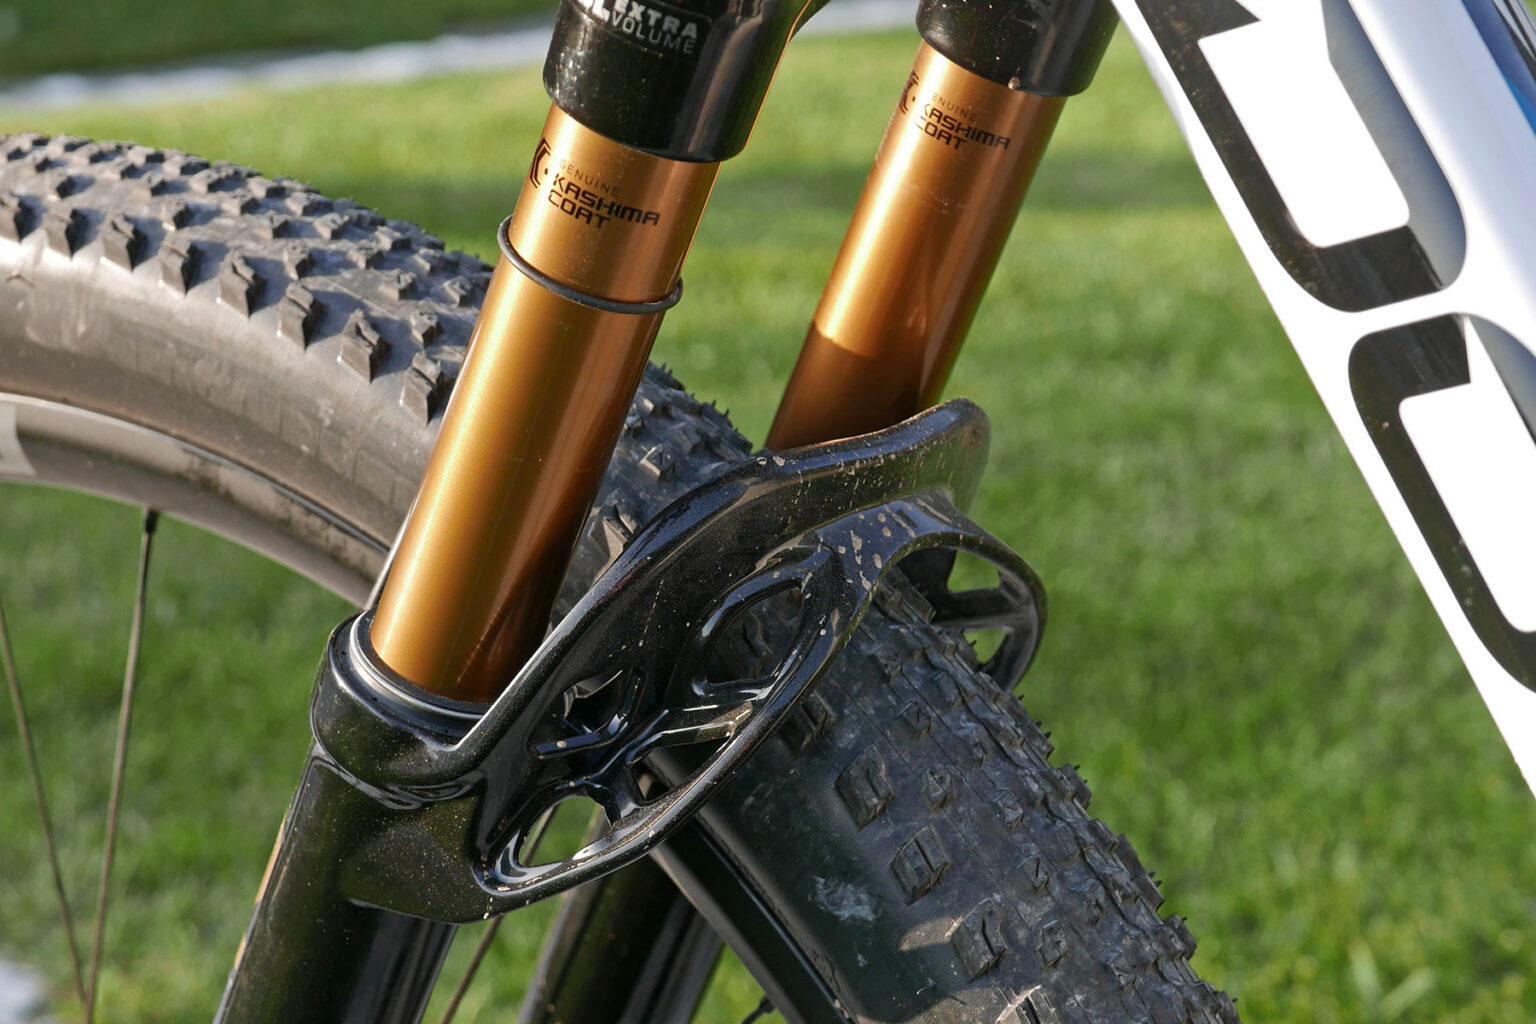 MY25 Fox 32 SC 100mm XC fork: Review, open spider web reverse crown